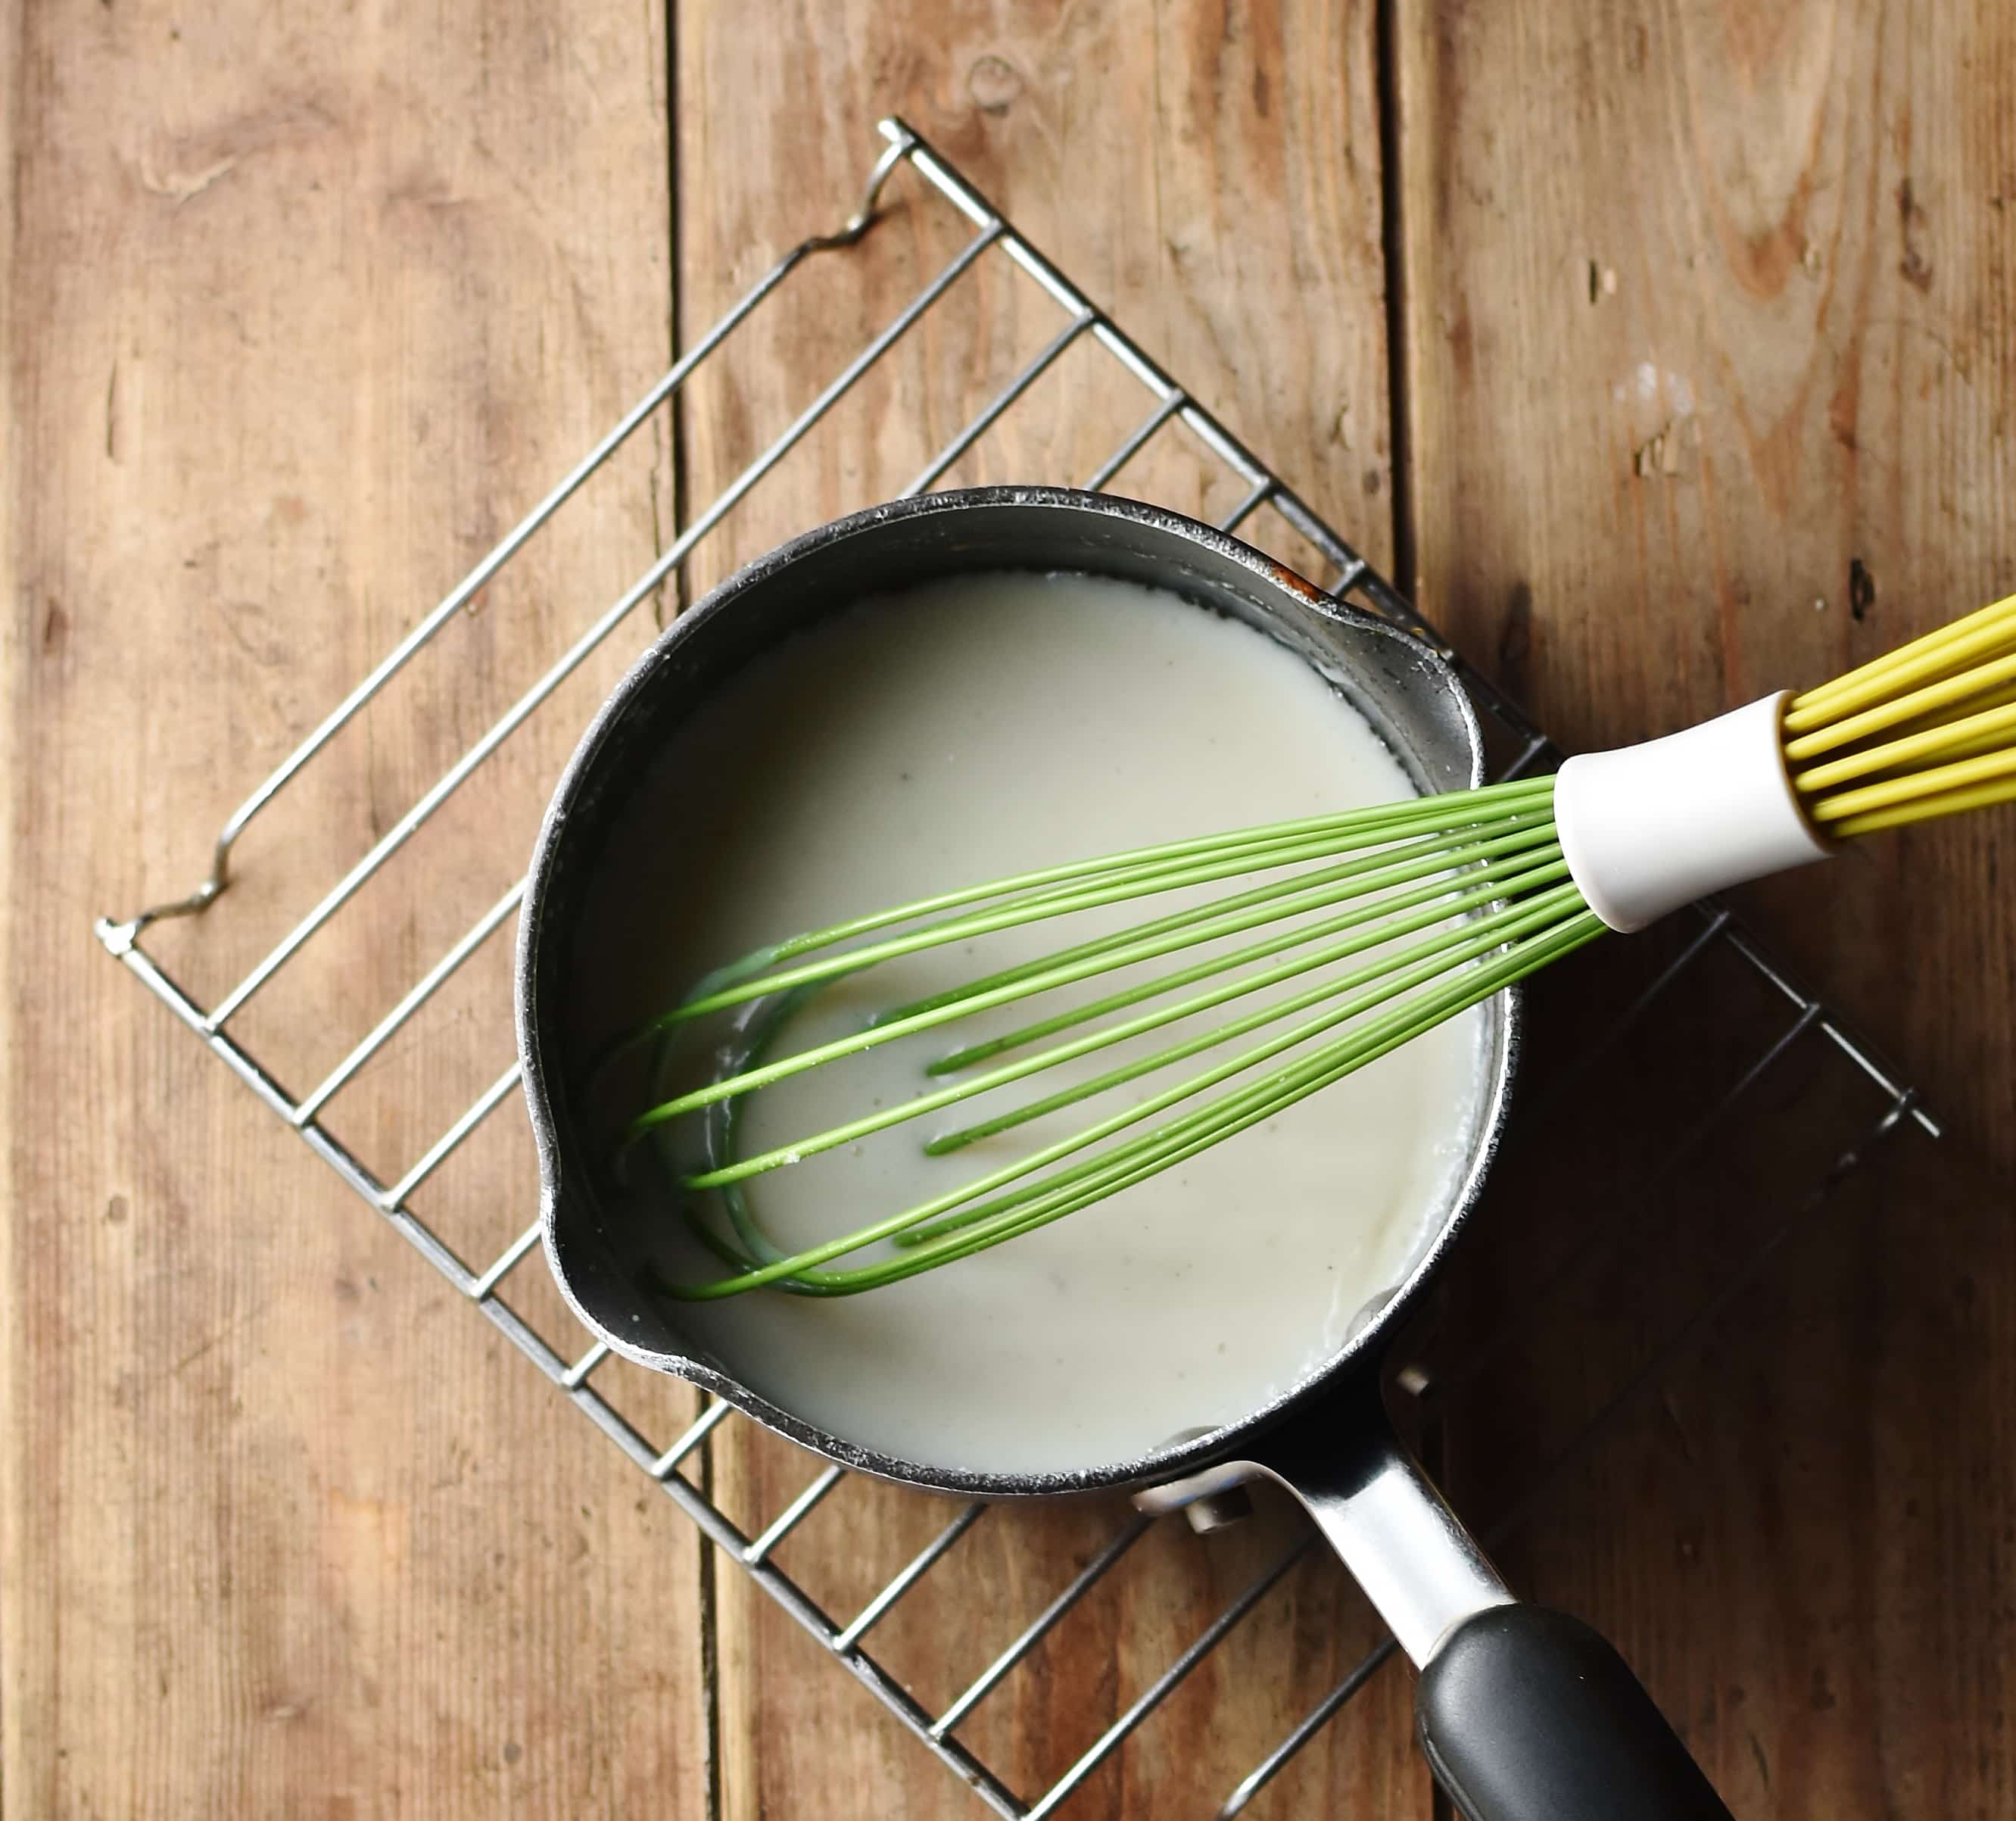 White sauce in small saucepan with green whisk on top of cooling rack.